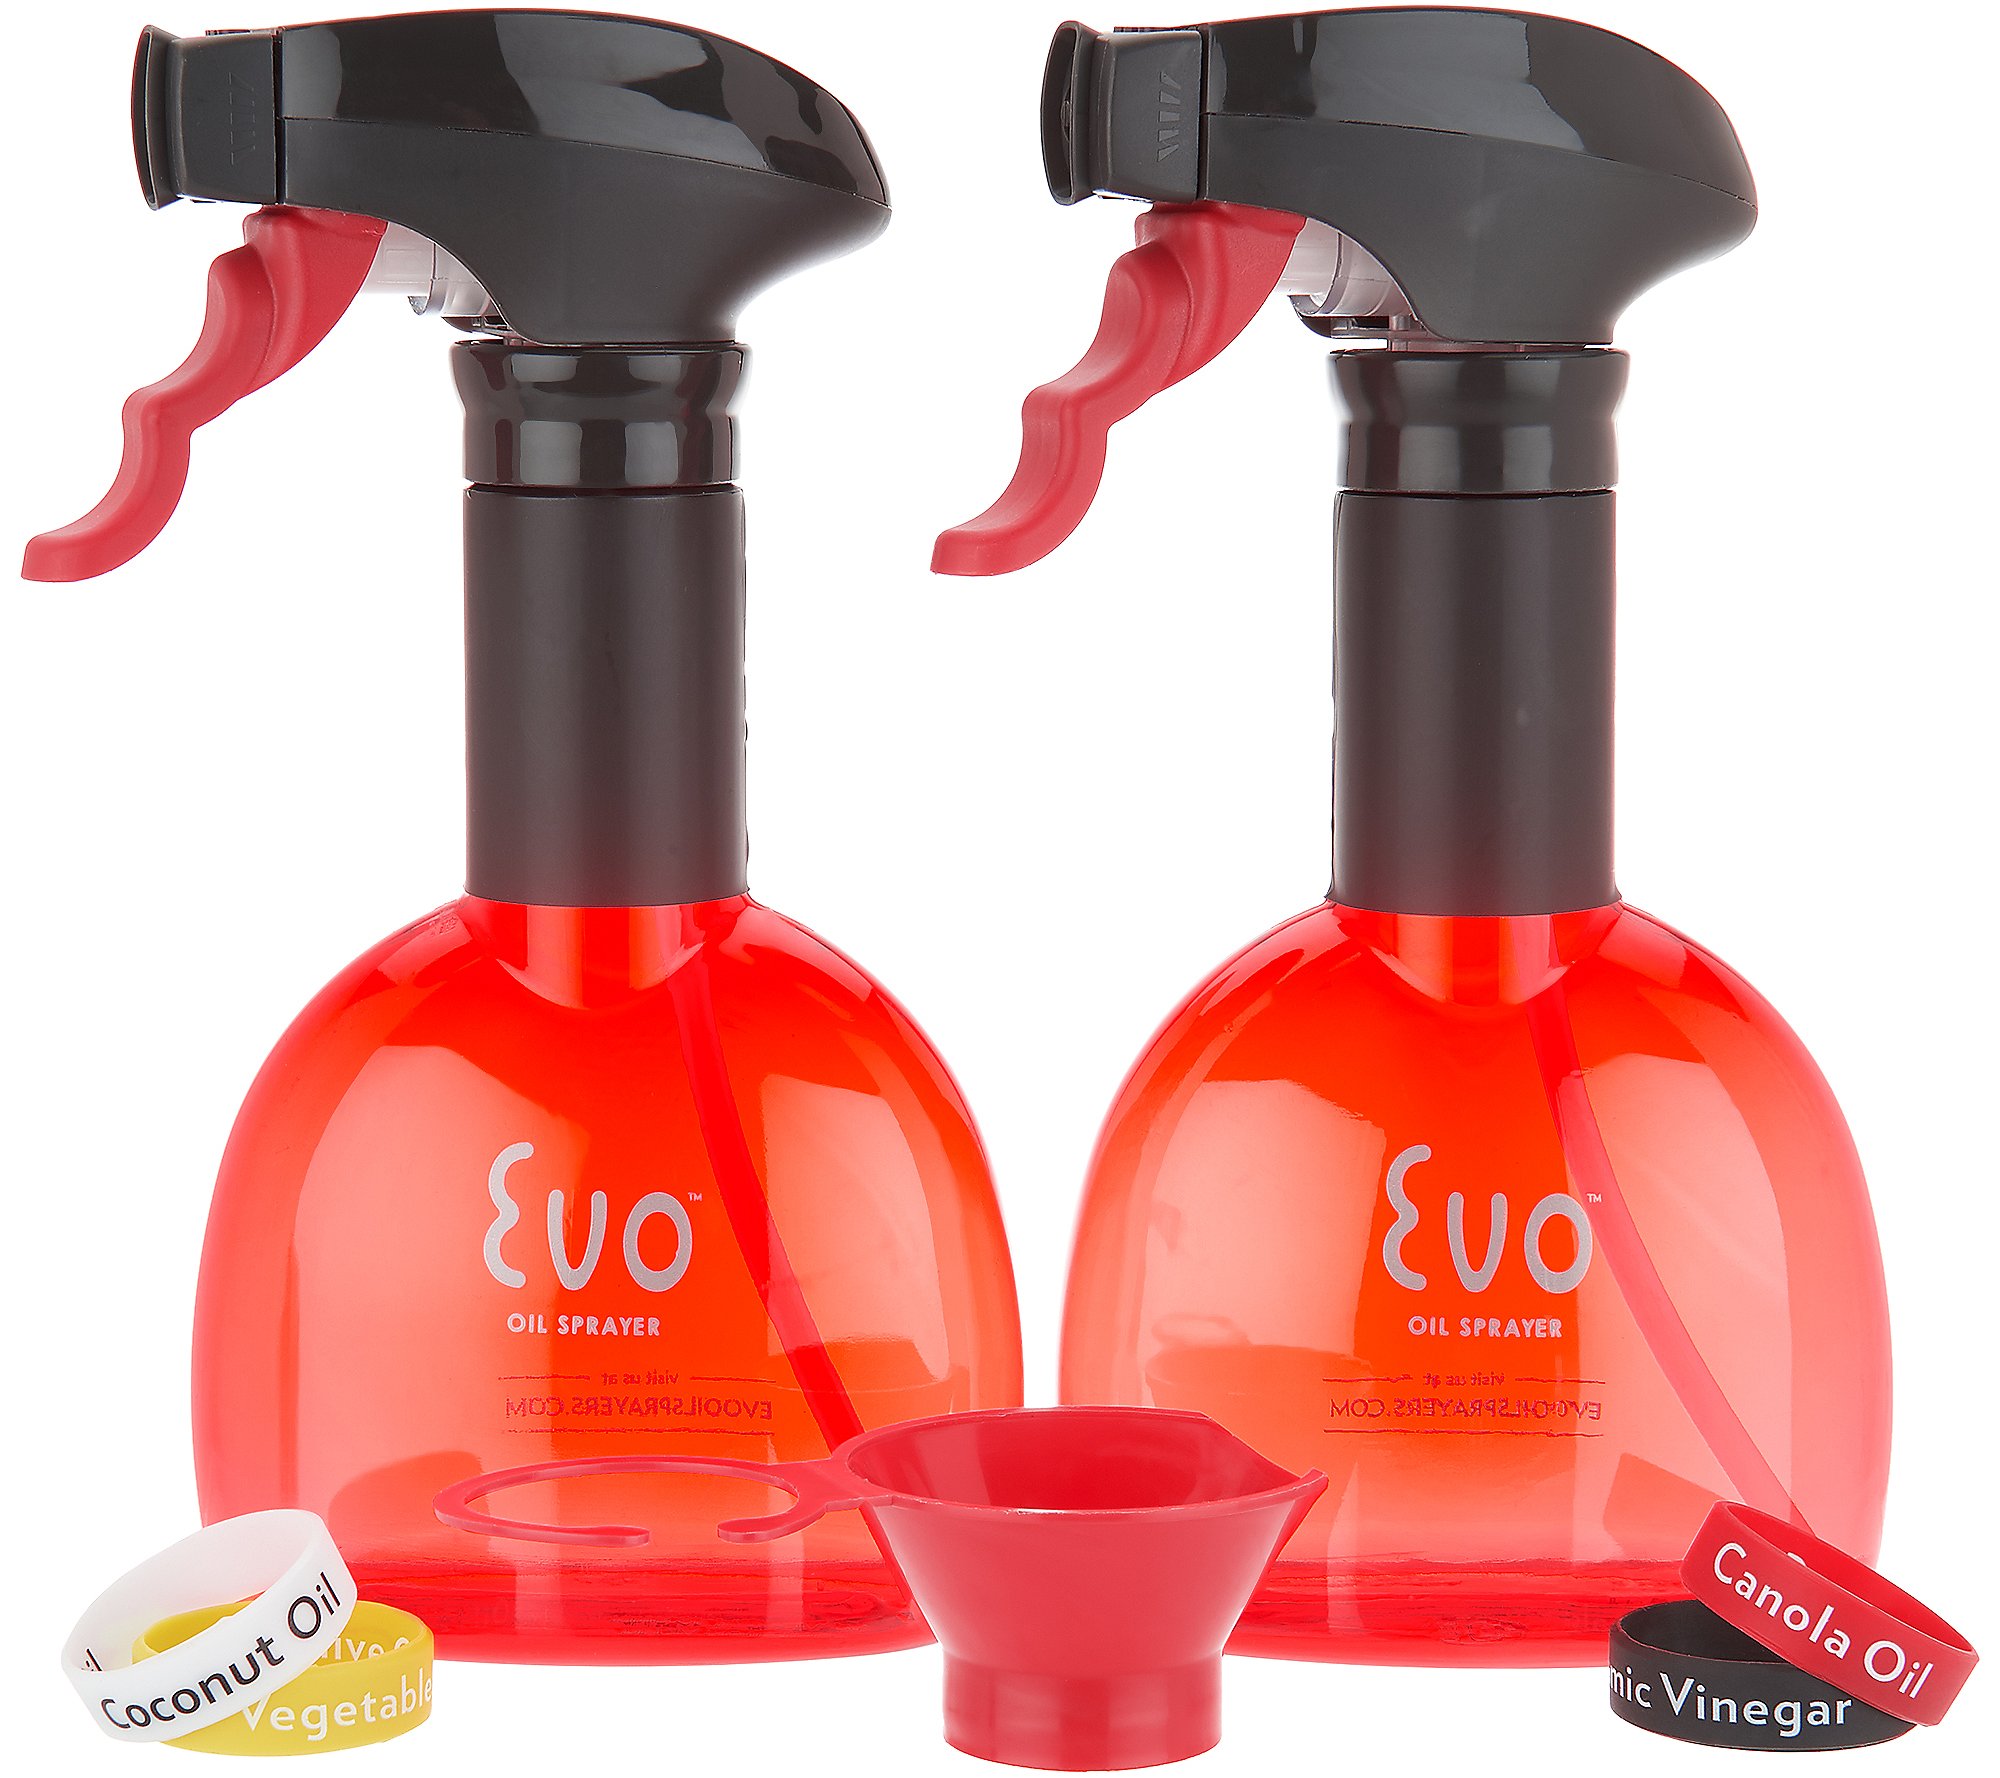 Details about   EVO SET OF 8 OZ.NON AEROSOL OIL TRIGGER SPRAYERS IN GIFT BOXES 3